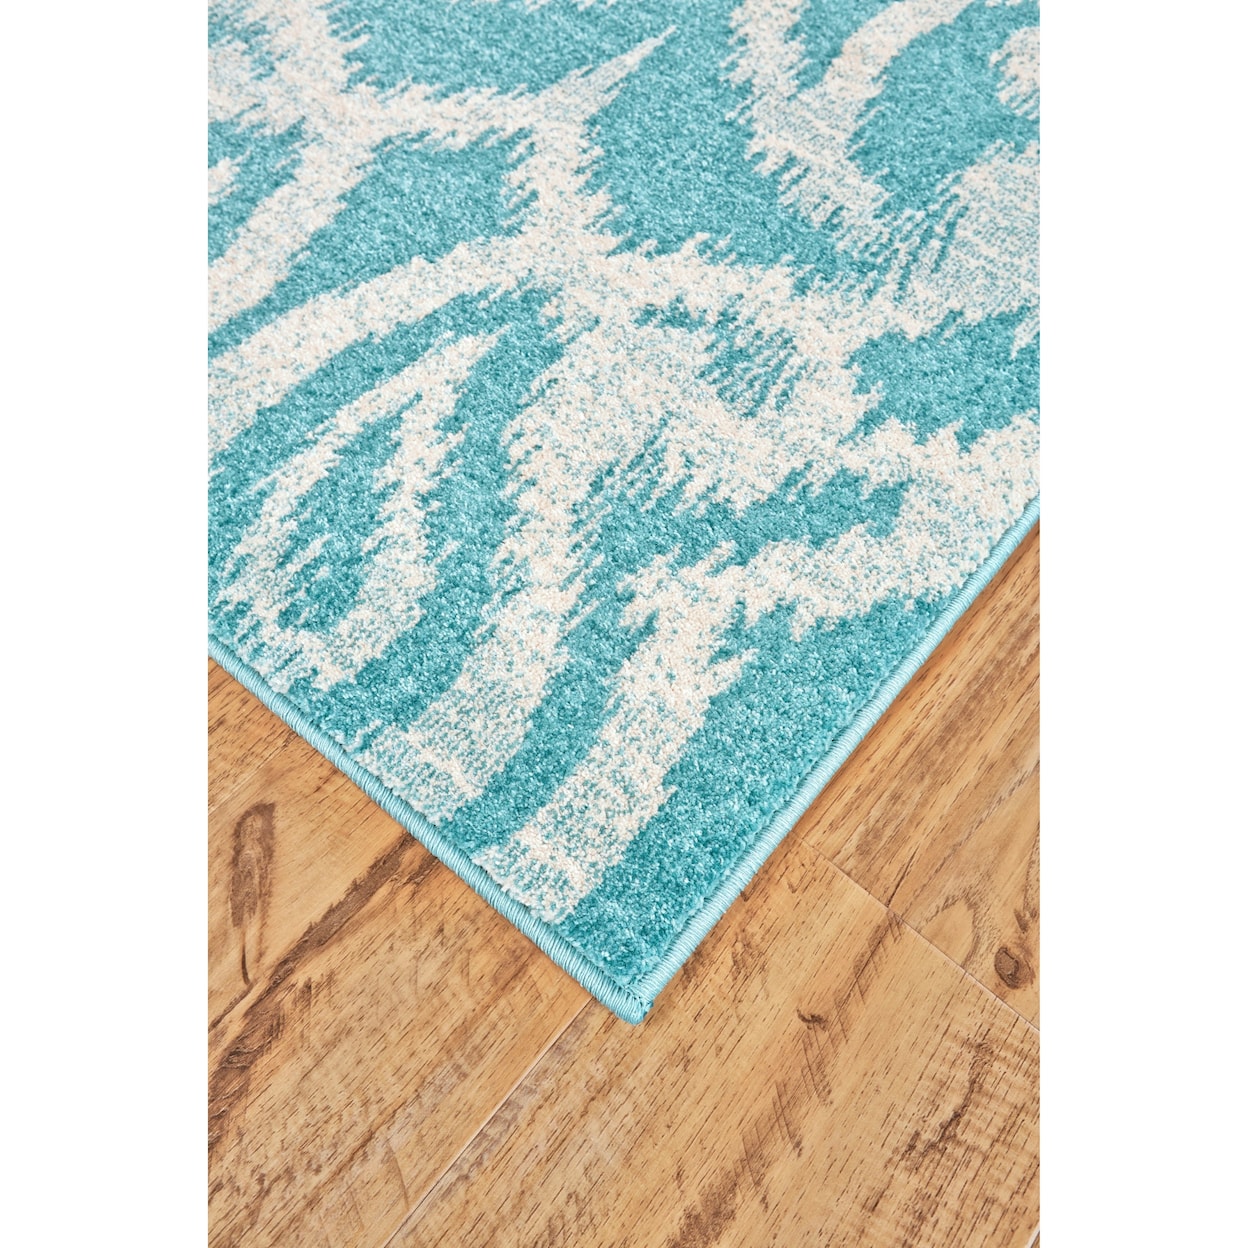 Feizy Rugs Harlow Teal 5' x 8' Area Rug